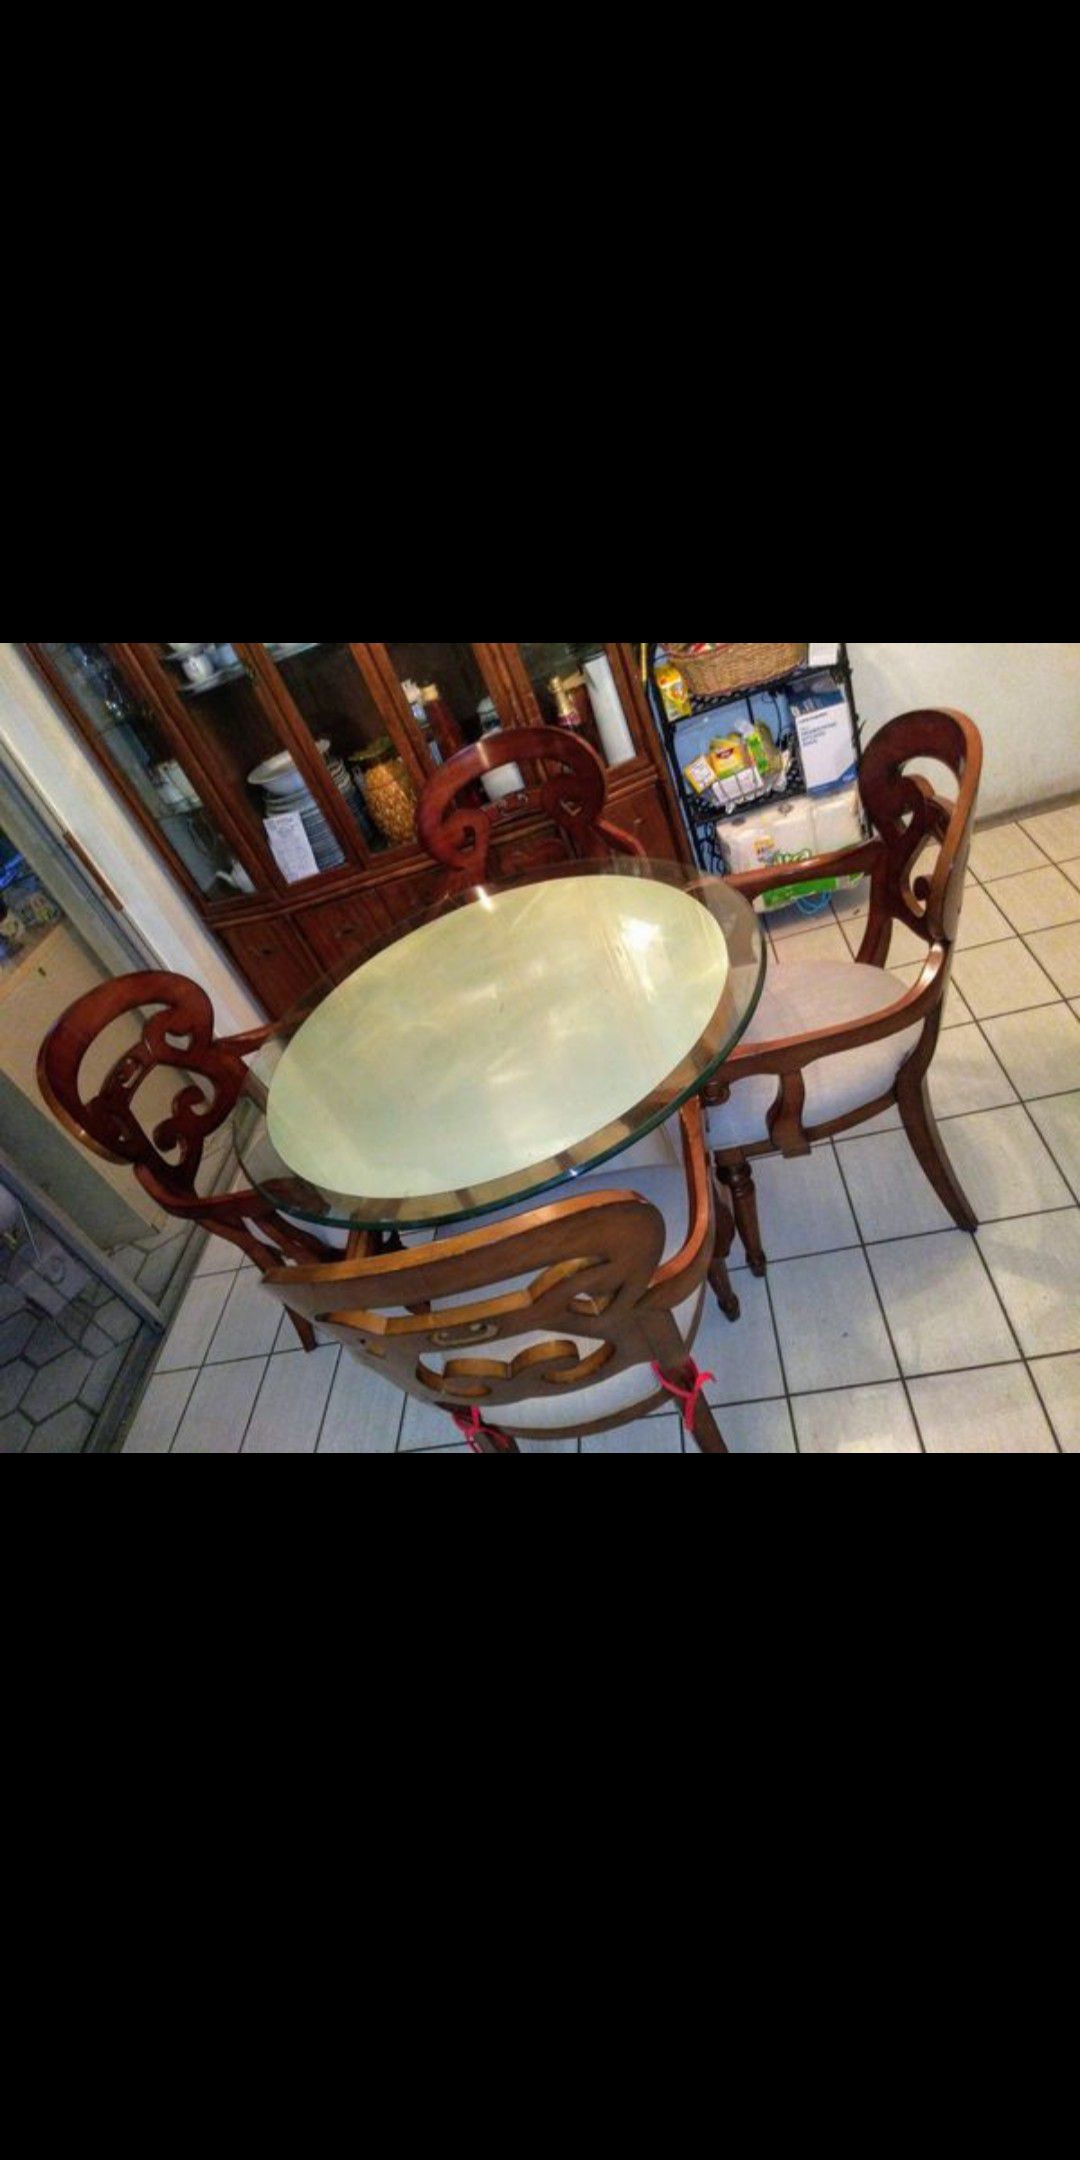 Kitchen table with 4 chairs.